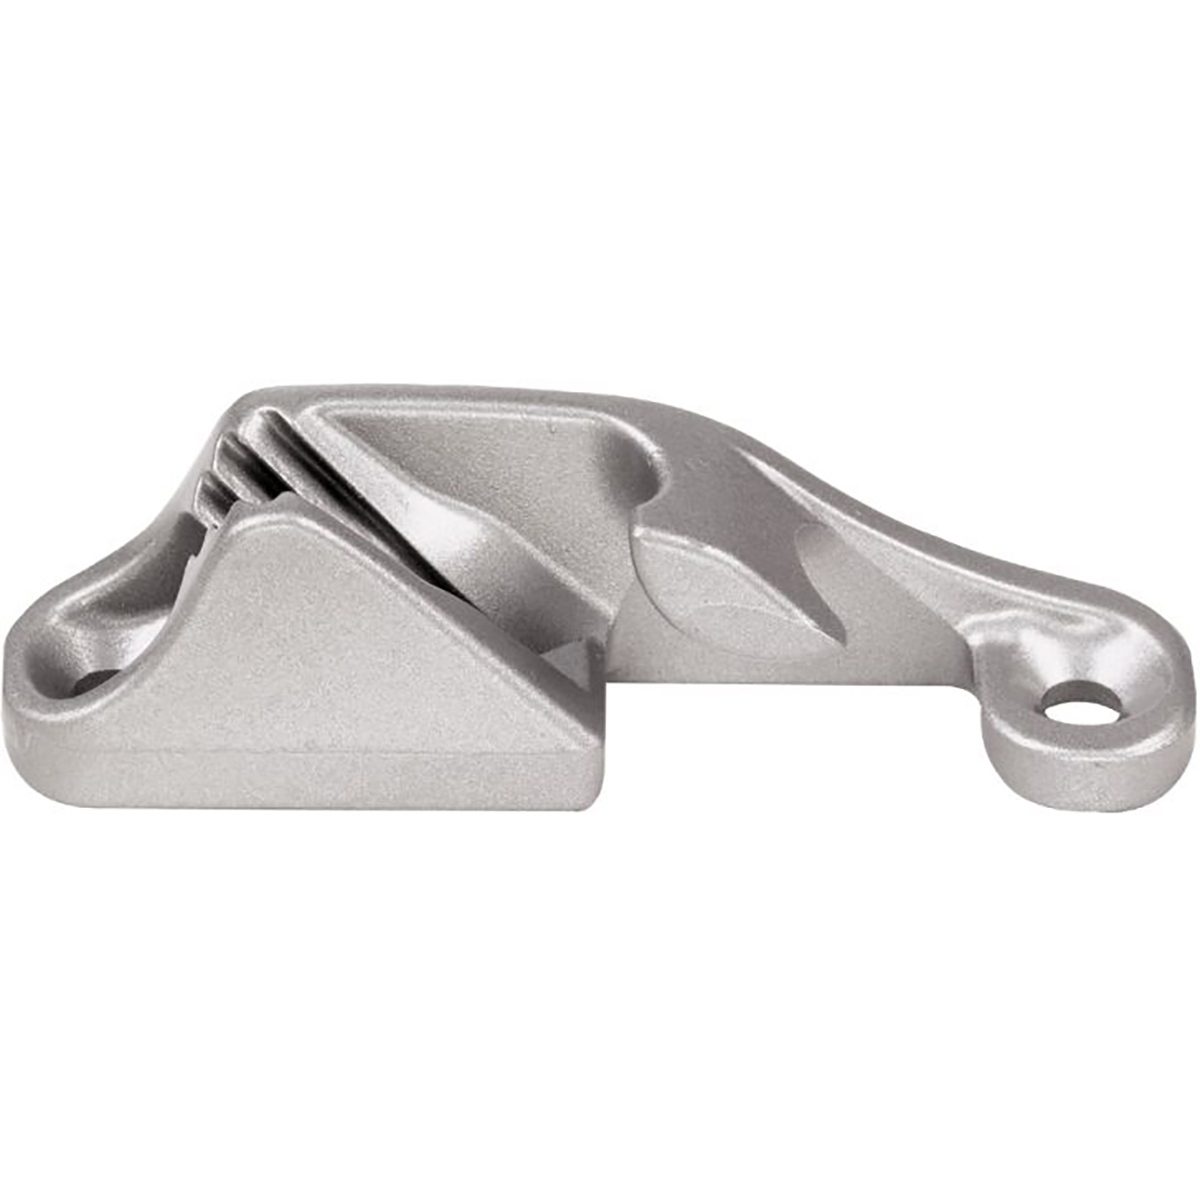 C217M1T - Clamcleat 6mm Side (S) Silver (Pk Size: 50)